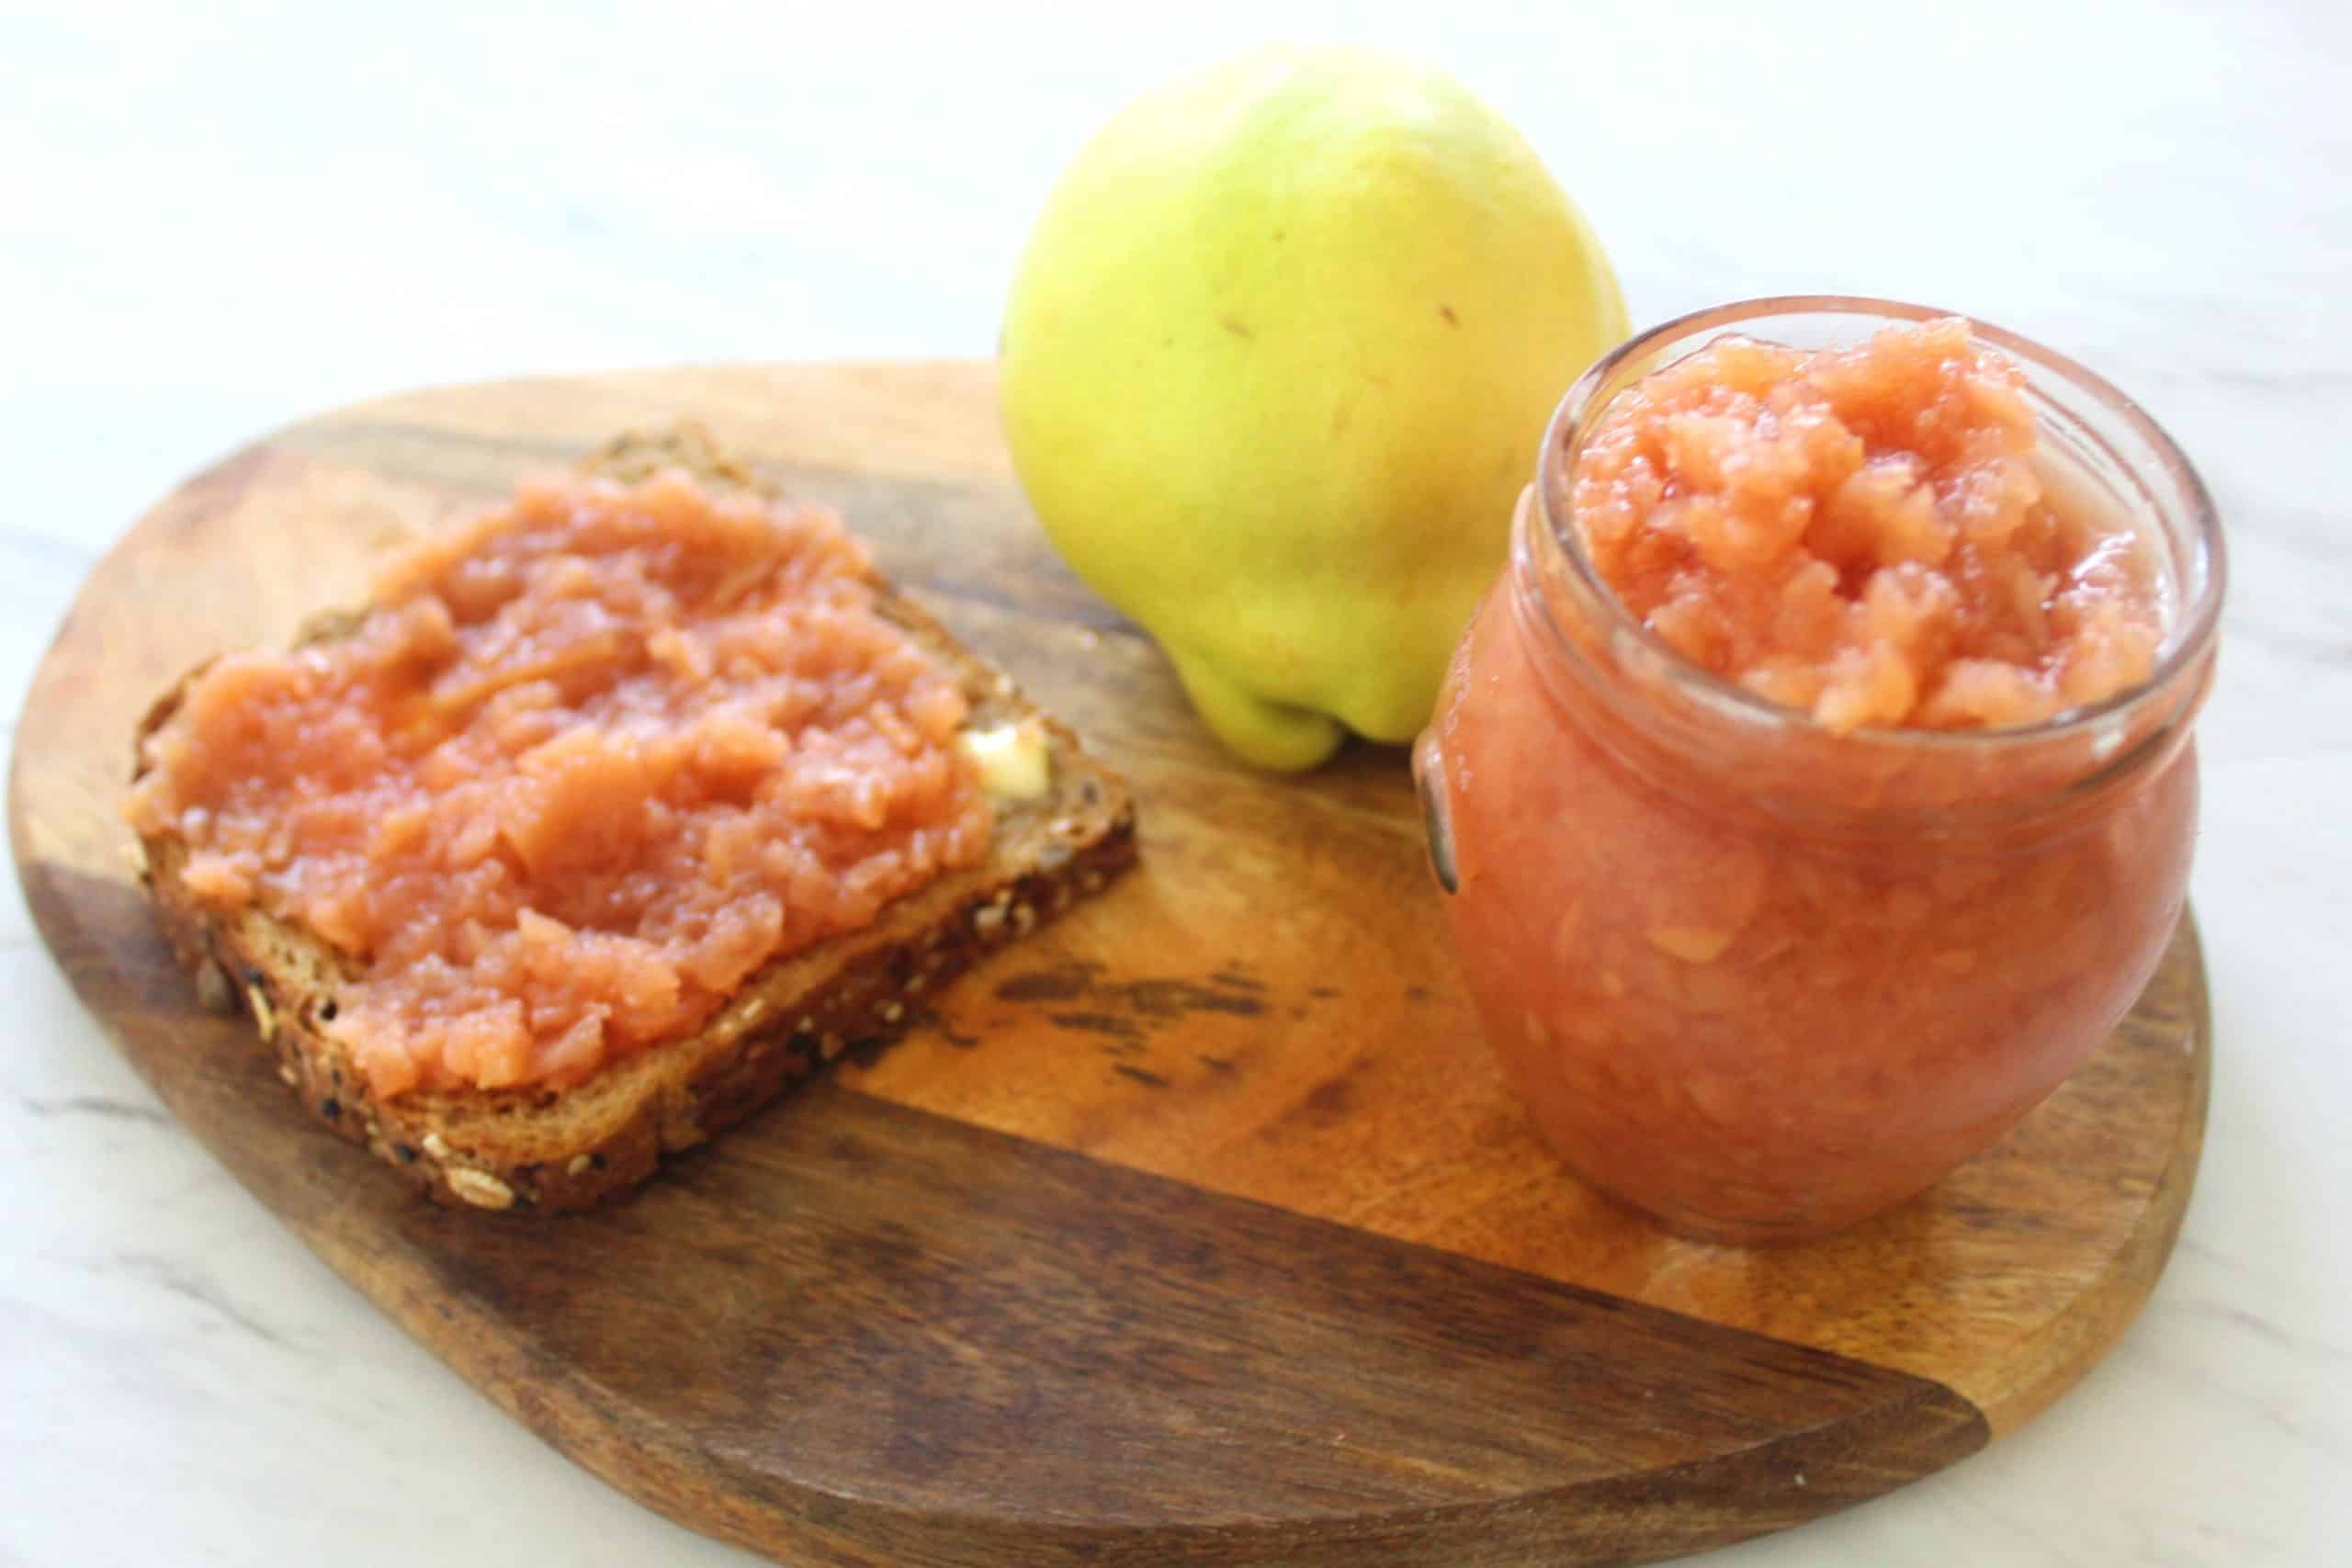 Quince jam jar, whole grain buttered toast layered with quince jam and a fresh quince shown all together.